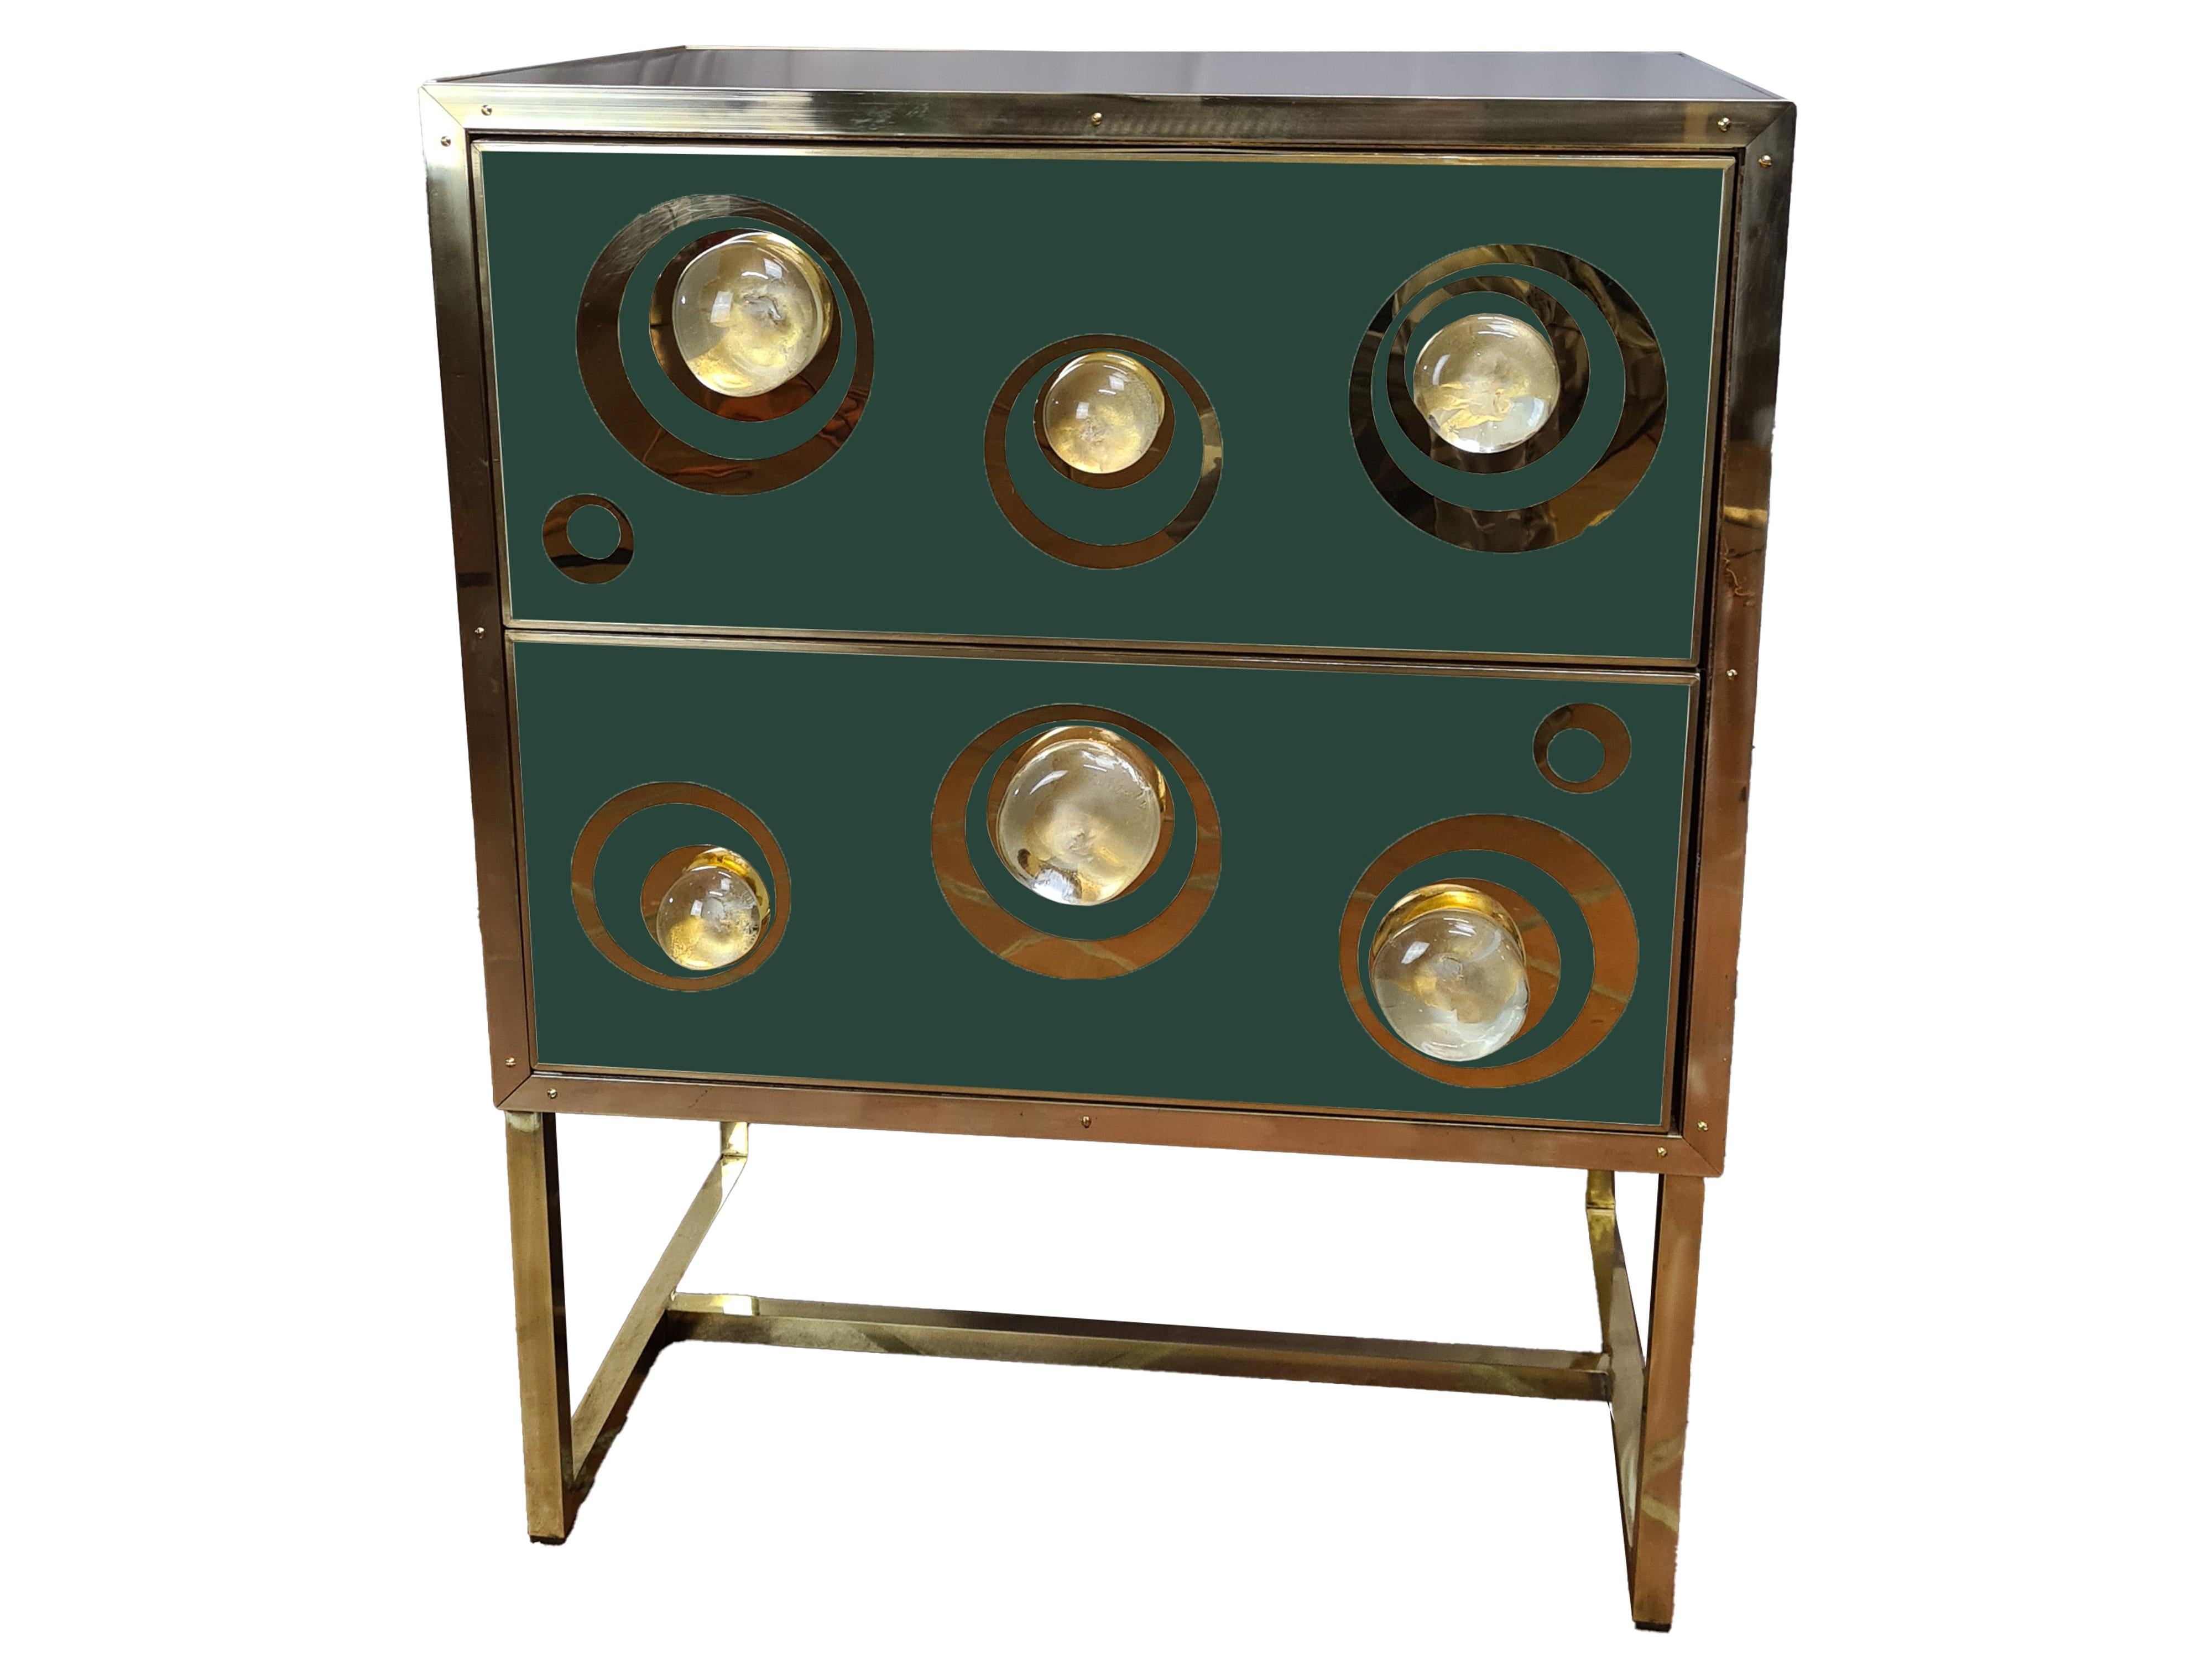 These stunning dark green and gold Italian Murano bedside tables are a true masterpiece of craftsmanship. 

Featuring Murano glass drawers and spheres, these nightstands are adorned with hand-embossed brass sides and a polished birch wood frame.